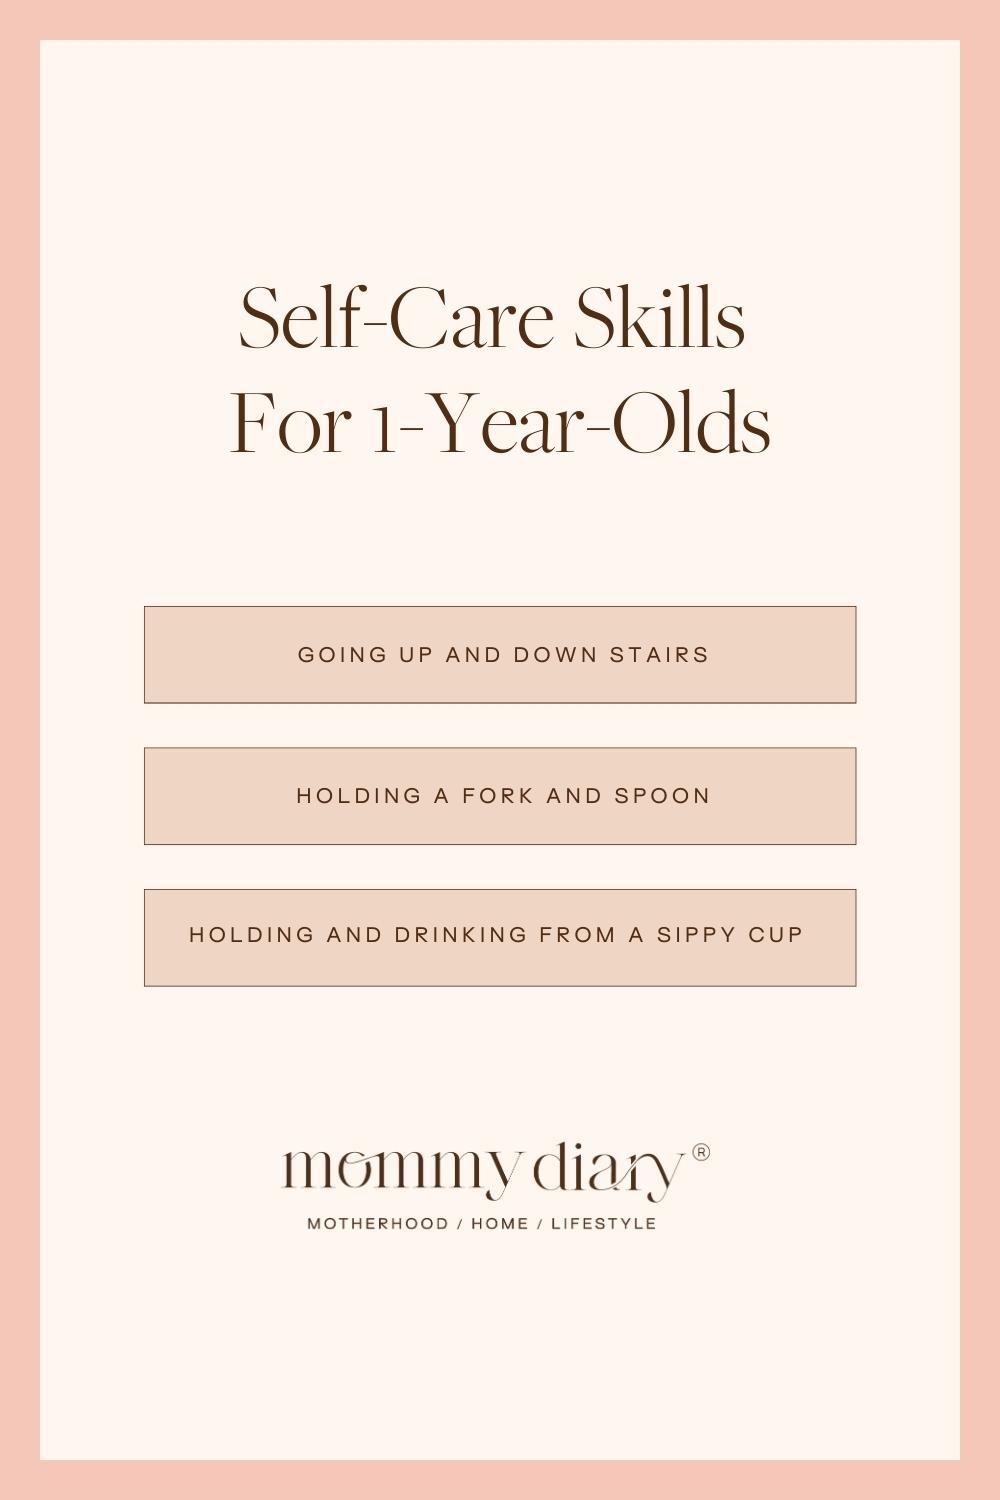 Self-Care Skills For 1-Year Olds